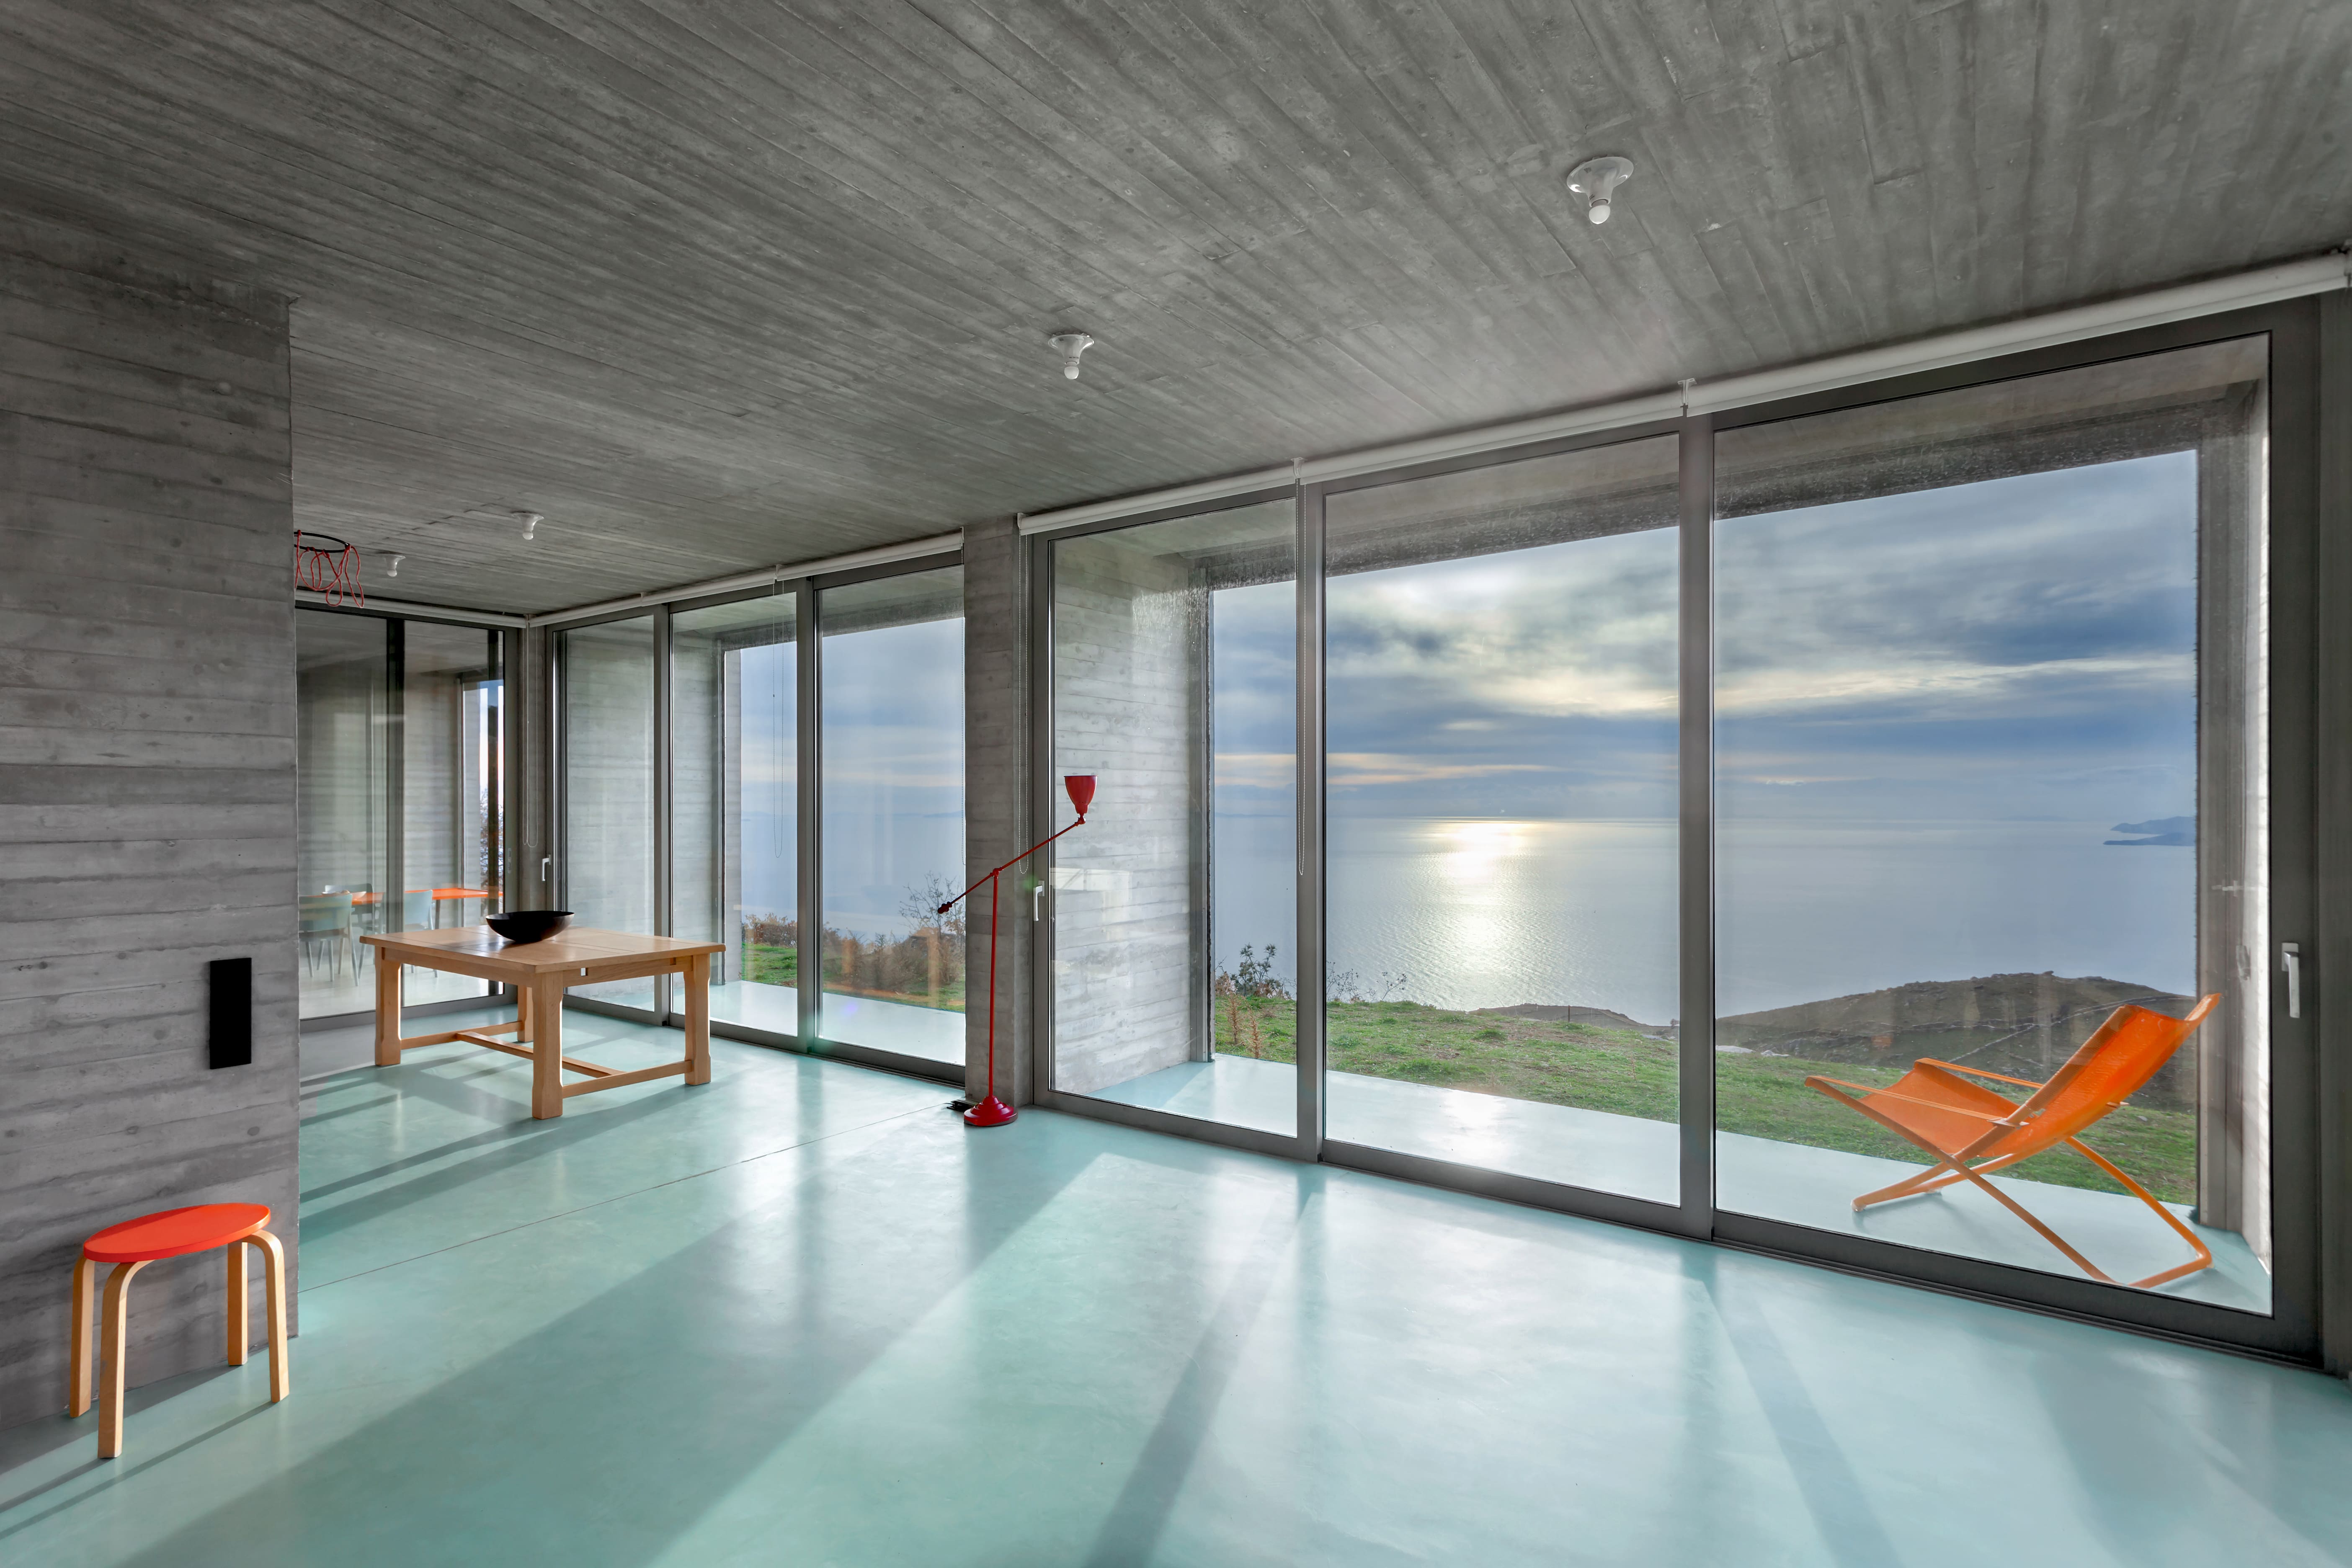 Windows stretch out at the front of the house to enjoy the sea and sky views